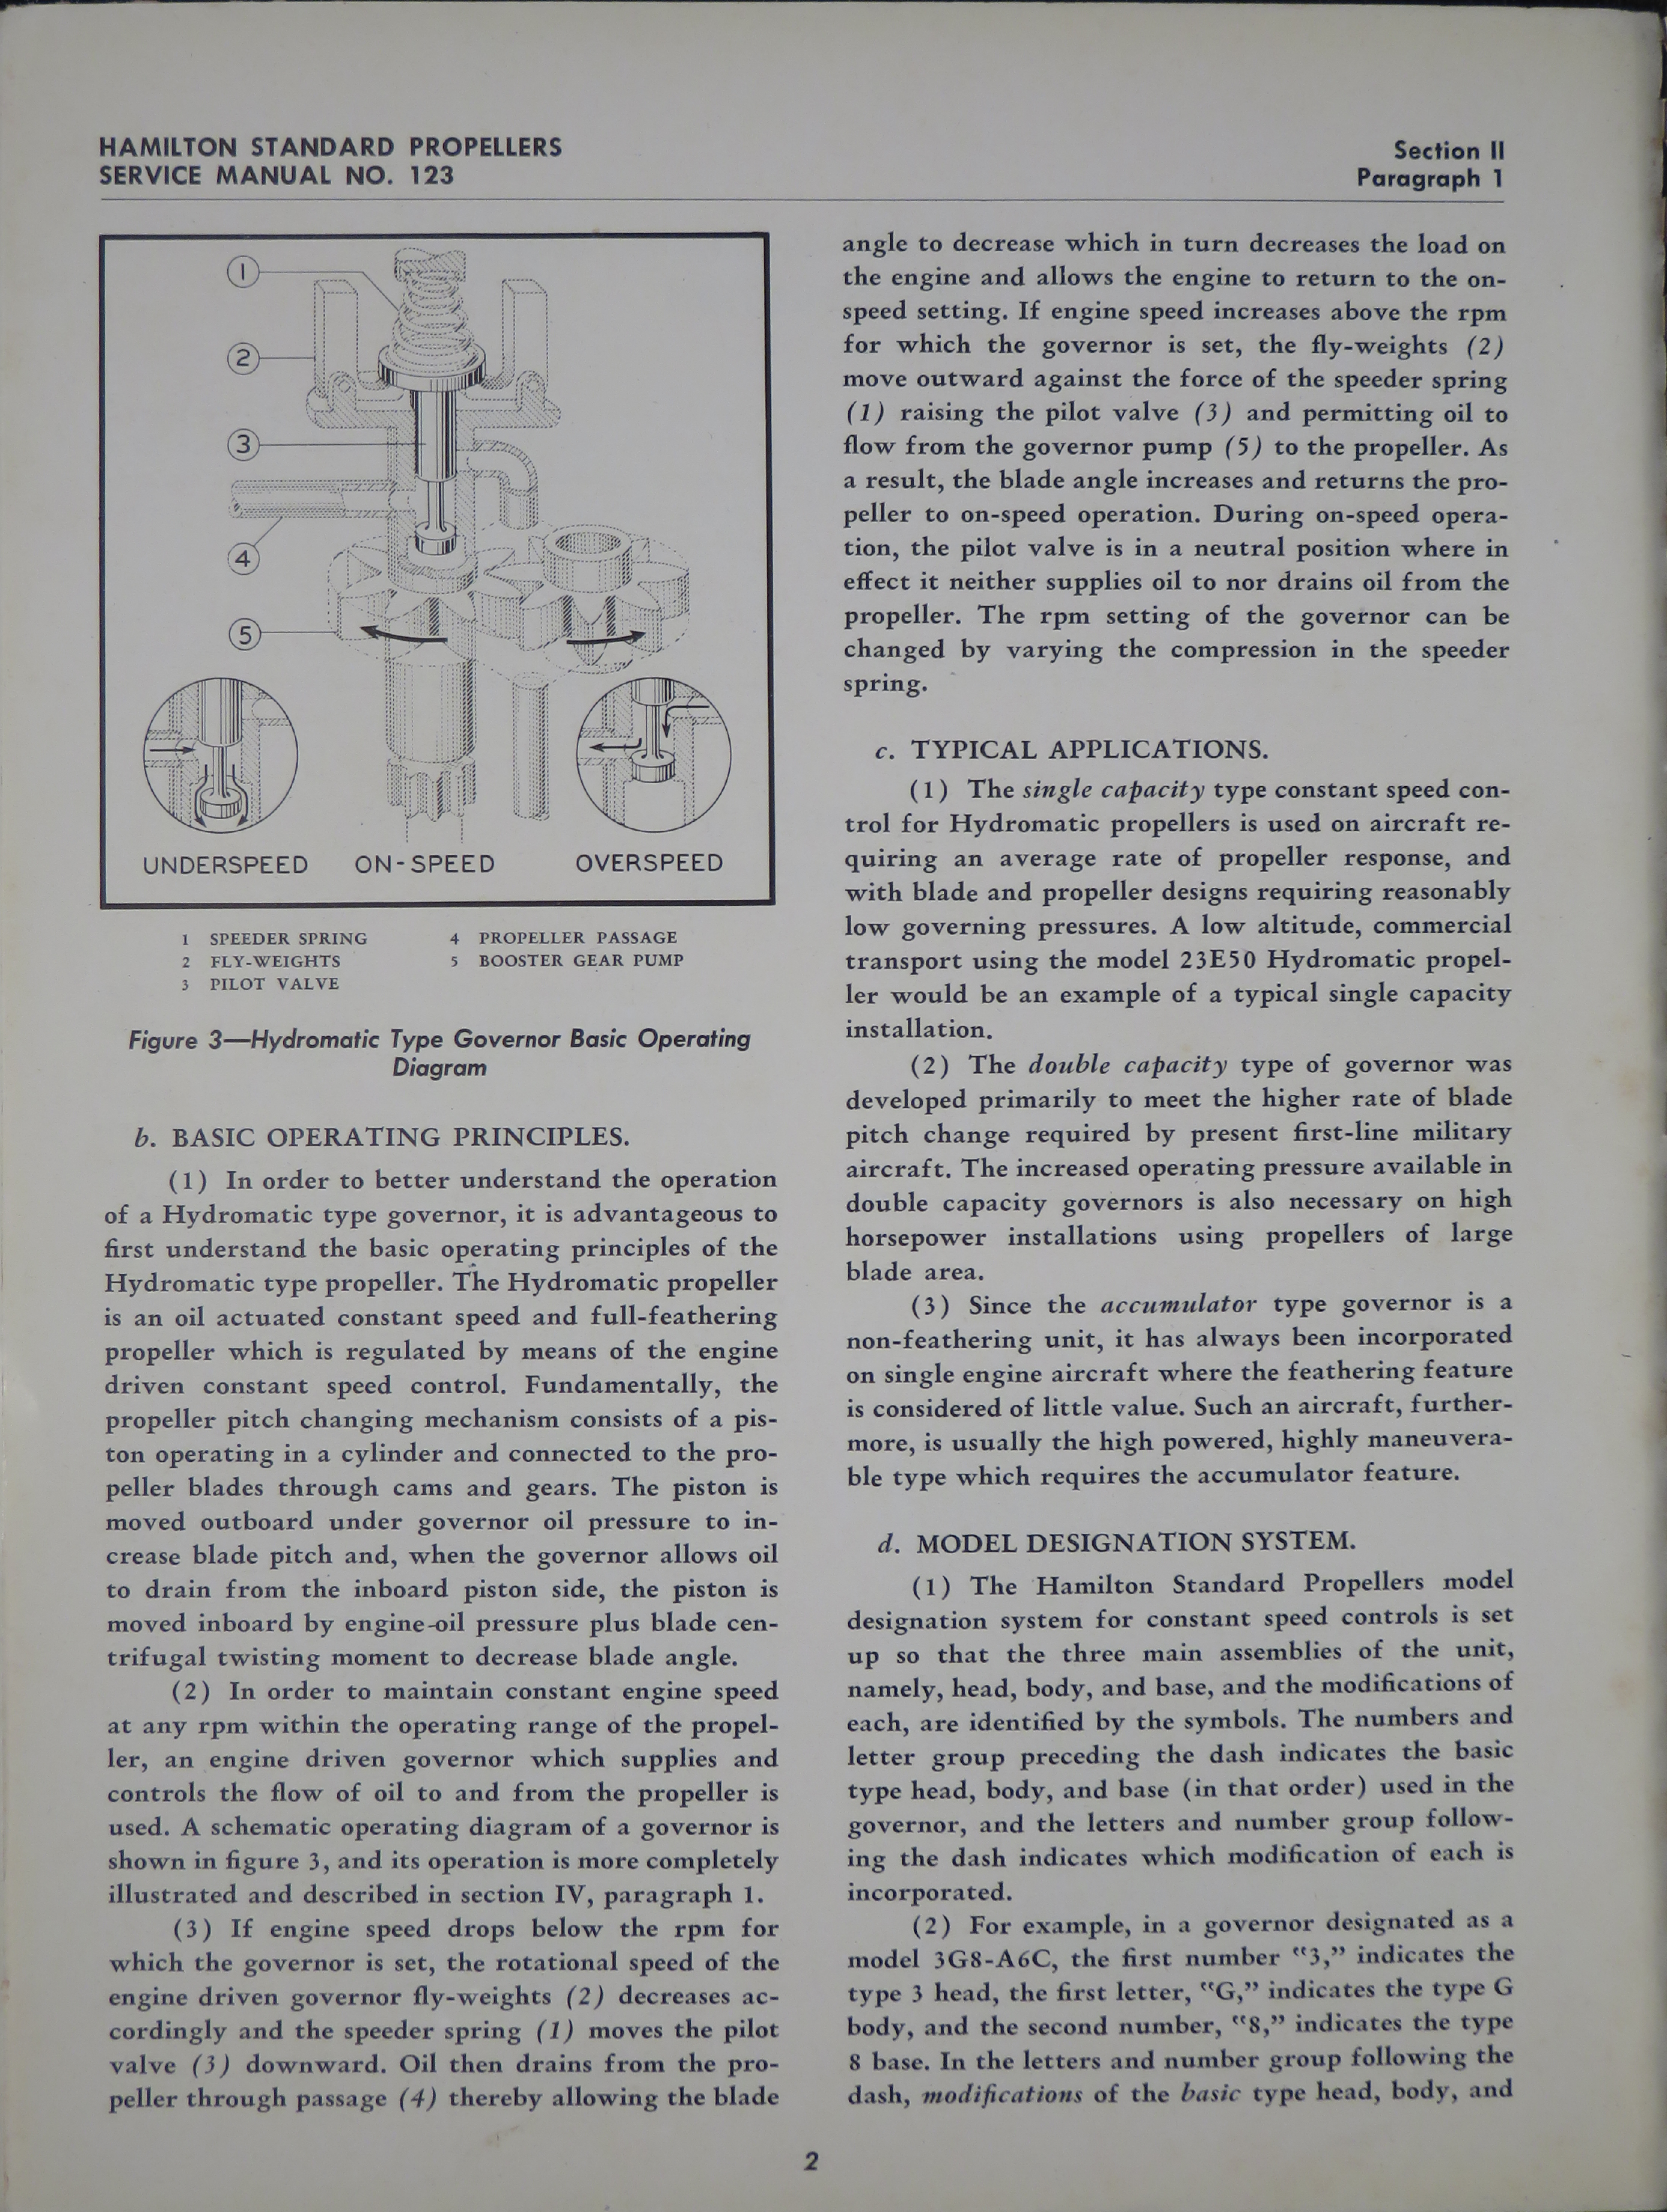 Sample page 8 from AirCorps Library document: Service Manual for Hydromatic Propeller Governors